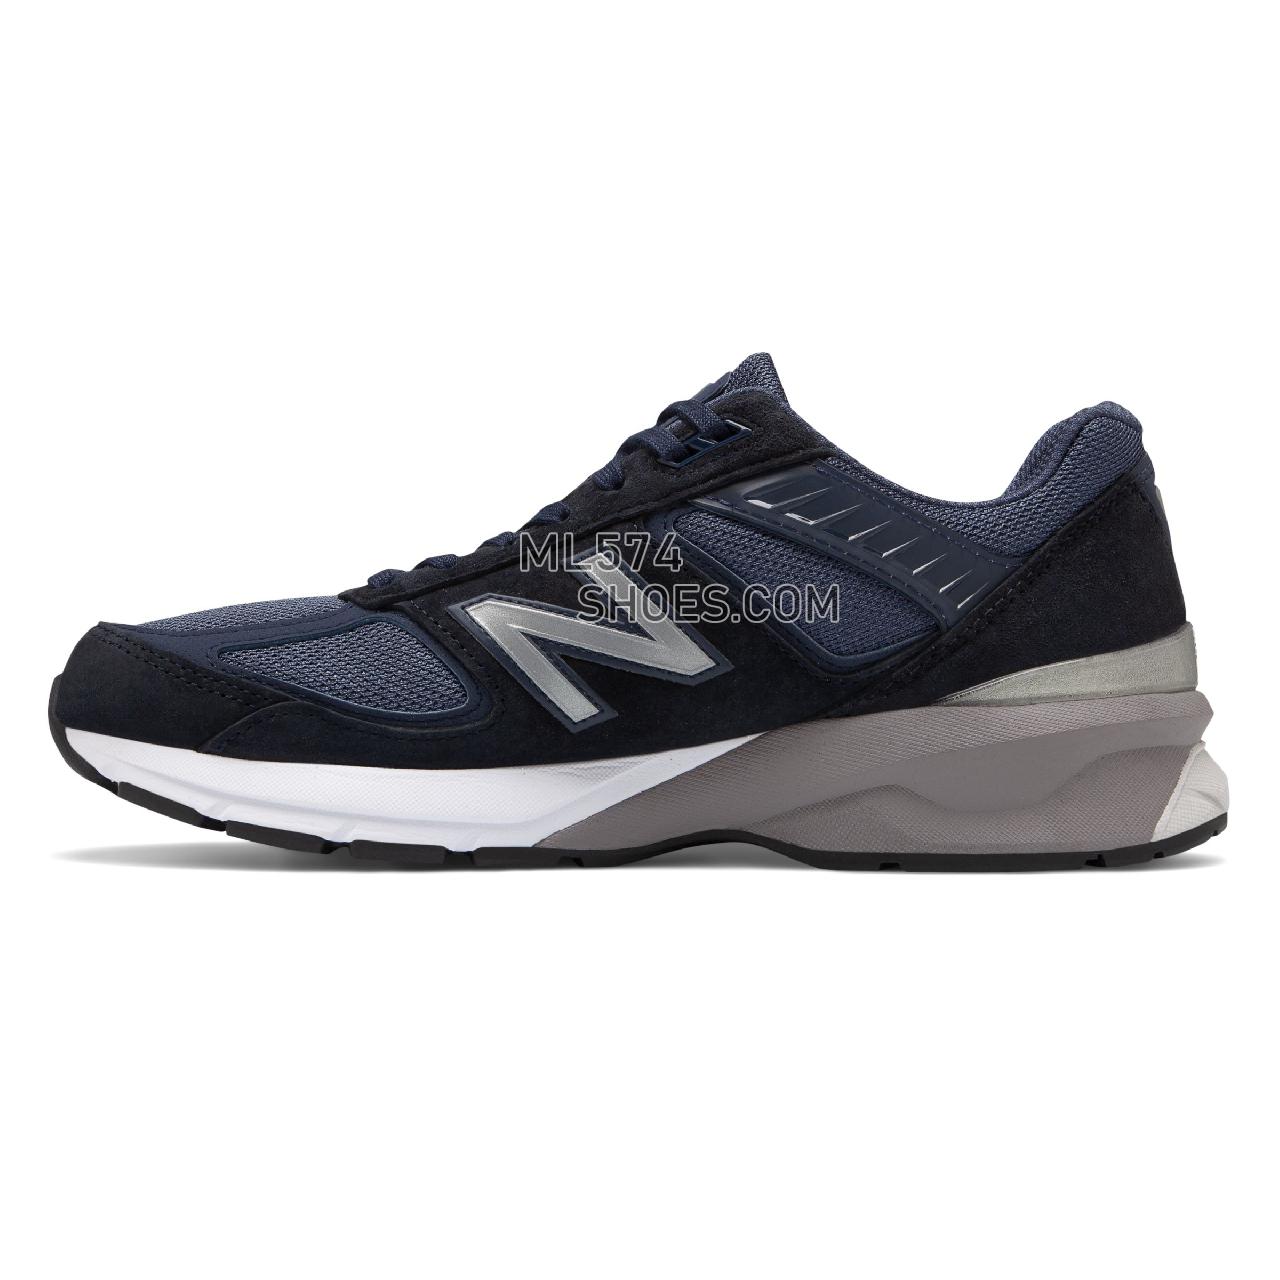 New Balance 990v5 Made in US - Men's Neutral Running - Navy with Silver - M990NV5